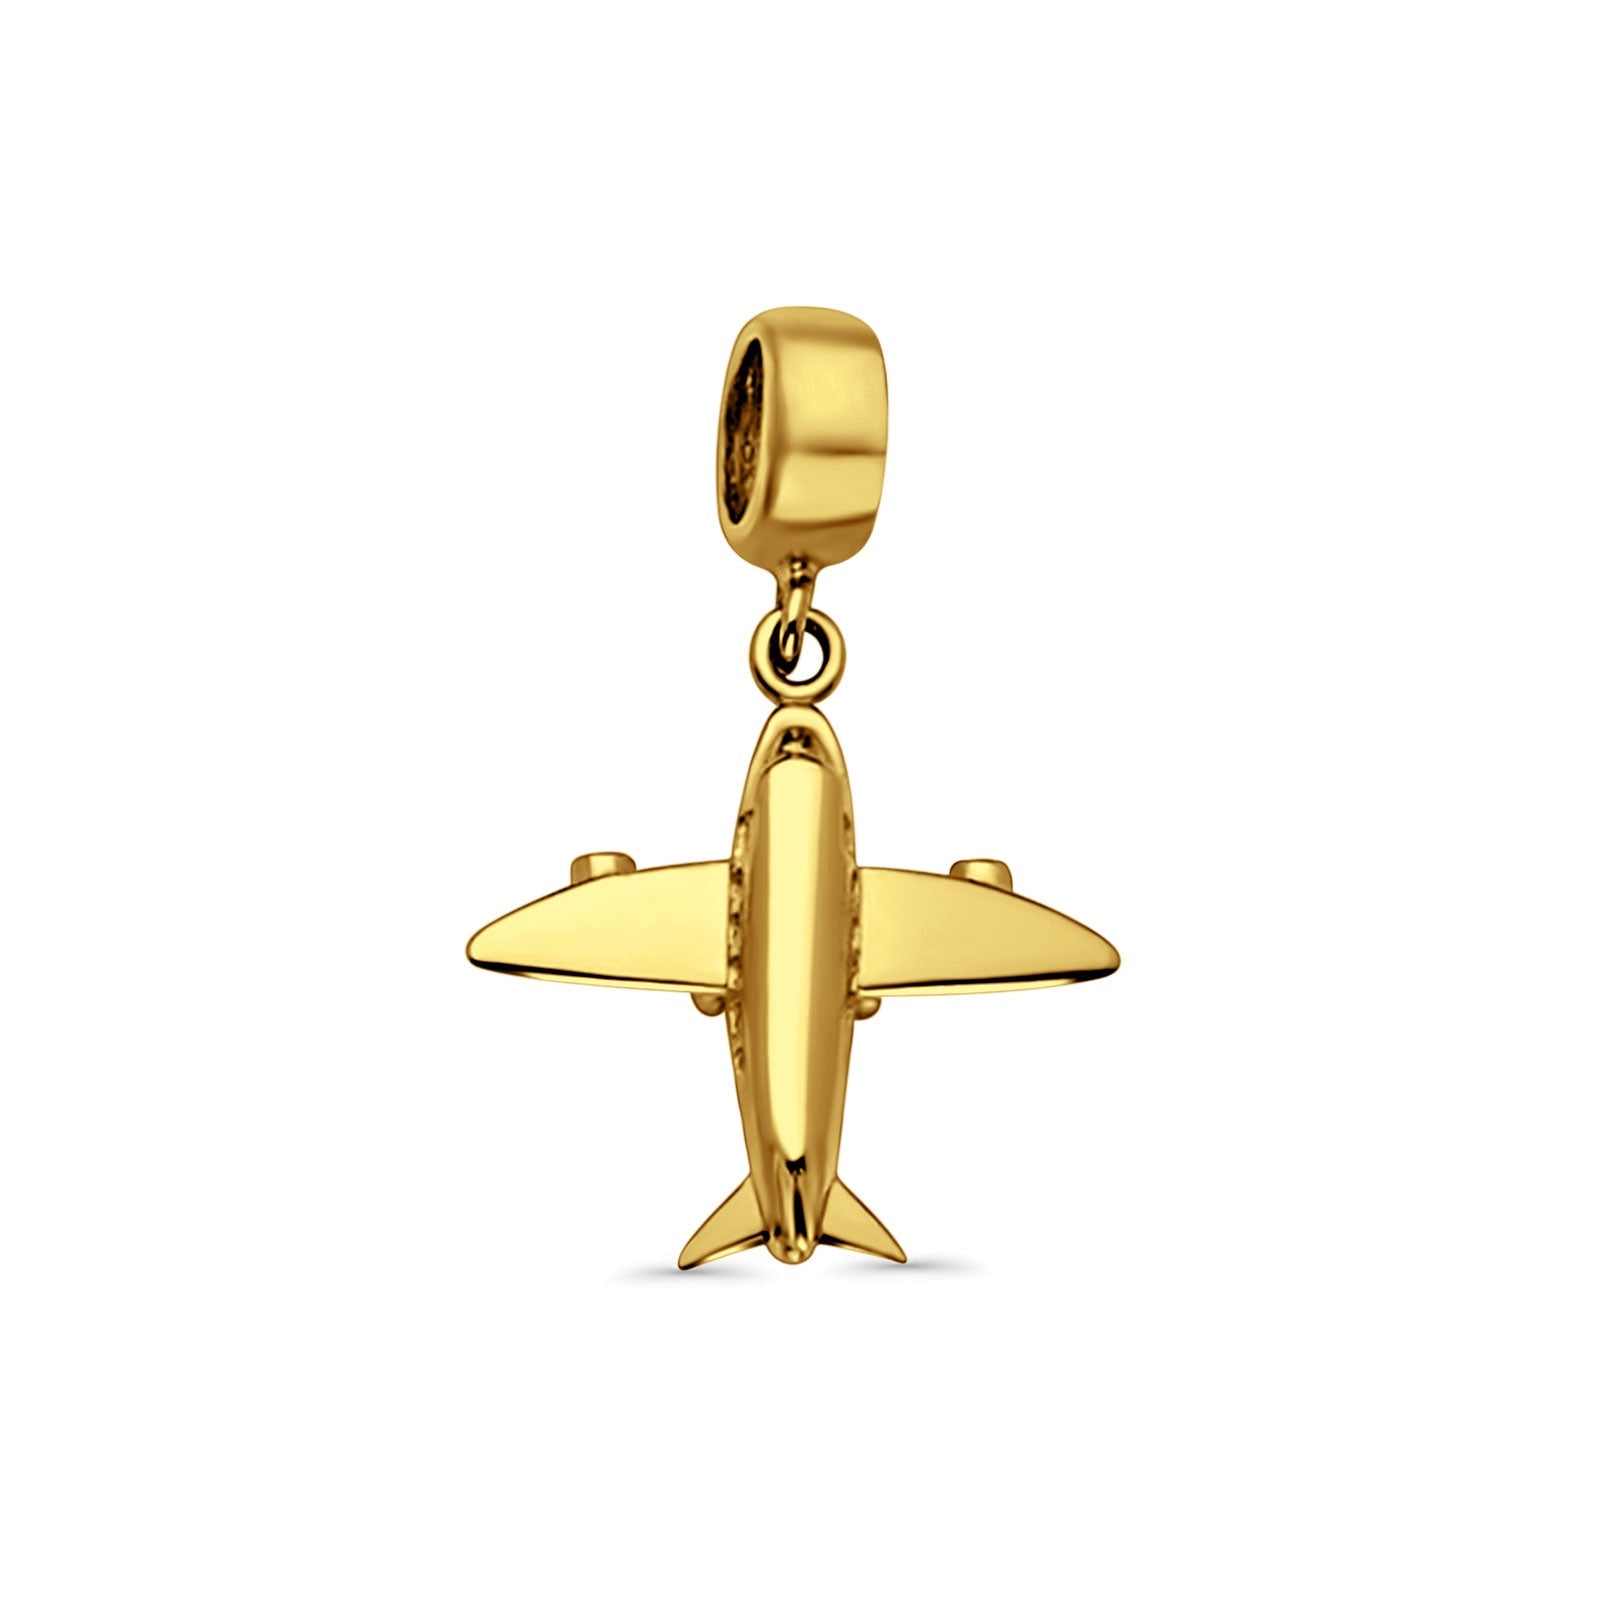 14K Yellow Gold Air Plane Charm for Mix&Match Pendant 22mmX16mm With 16 Inch To 18 Inch 1.1MM Width Wheat Chain Necklace